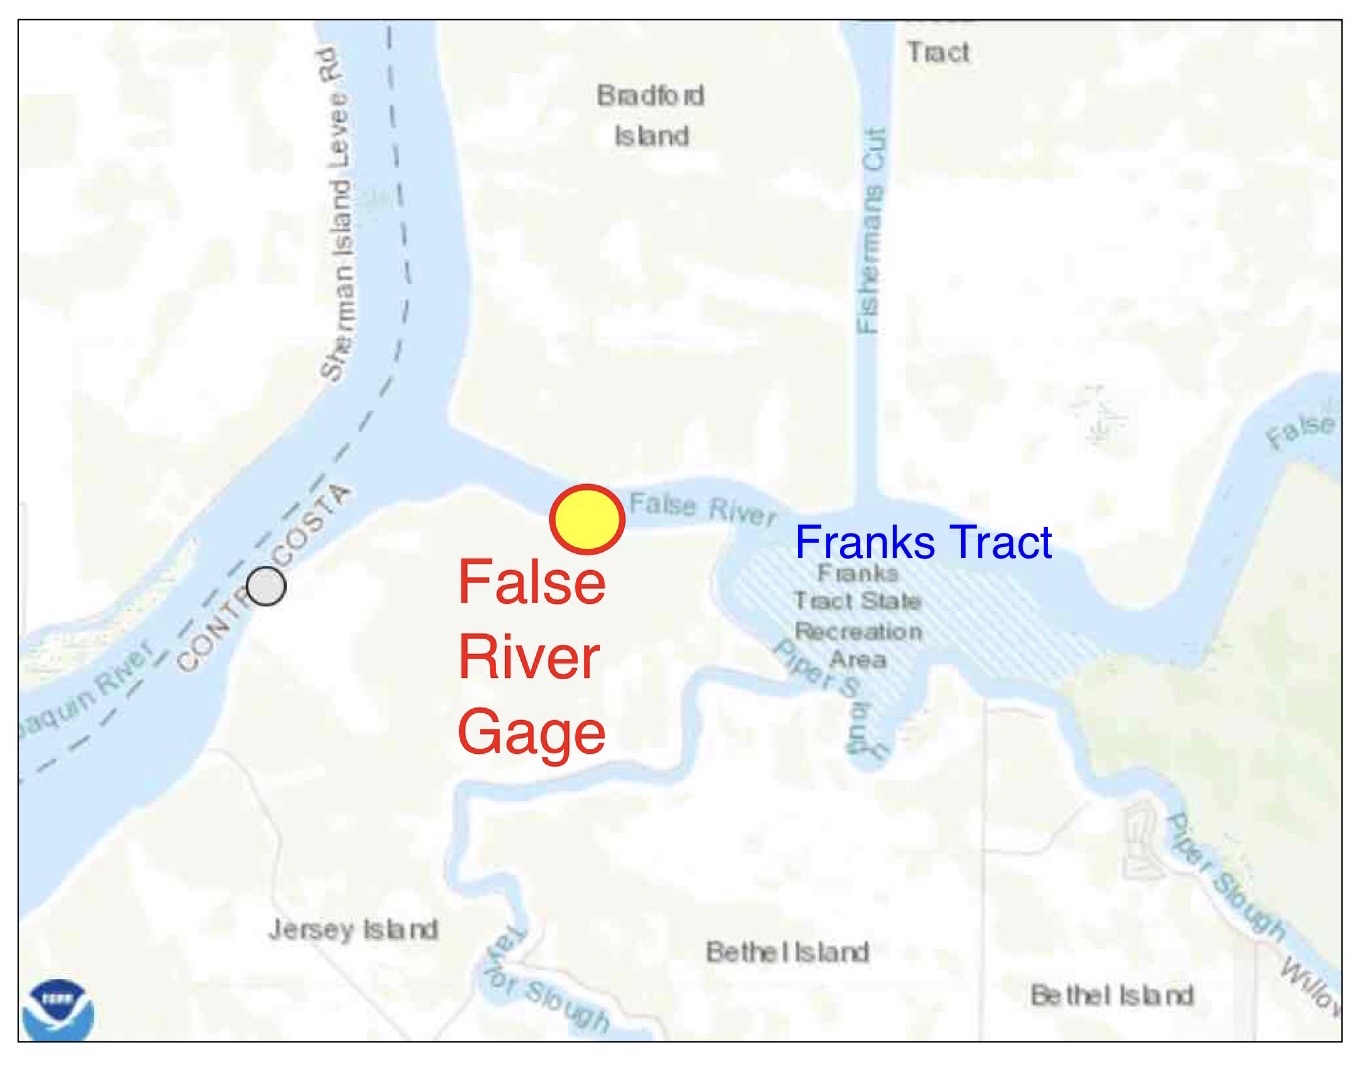 Figure 1. Franks Tract and False River gage location in west Delta.